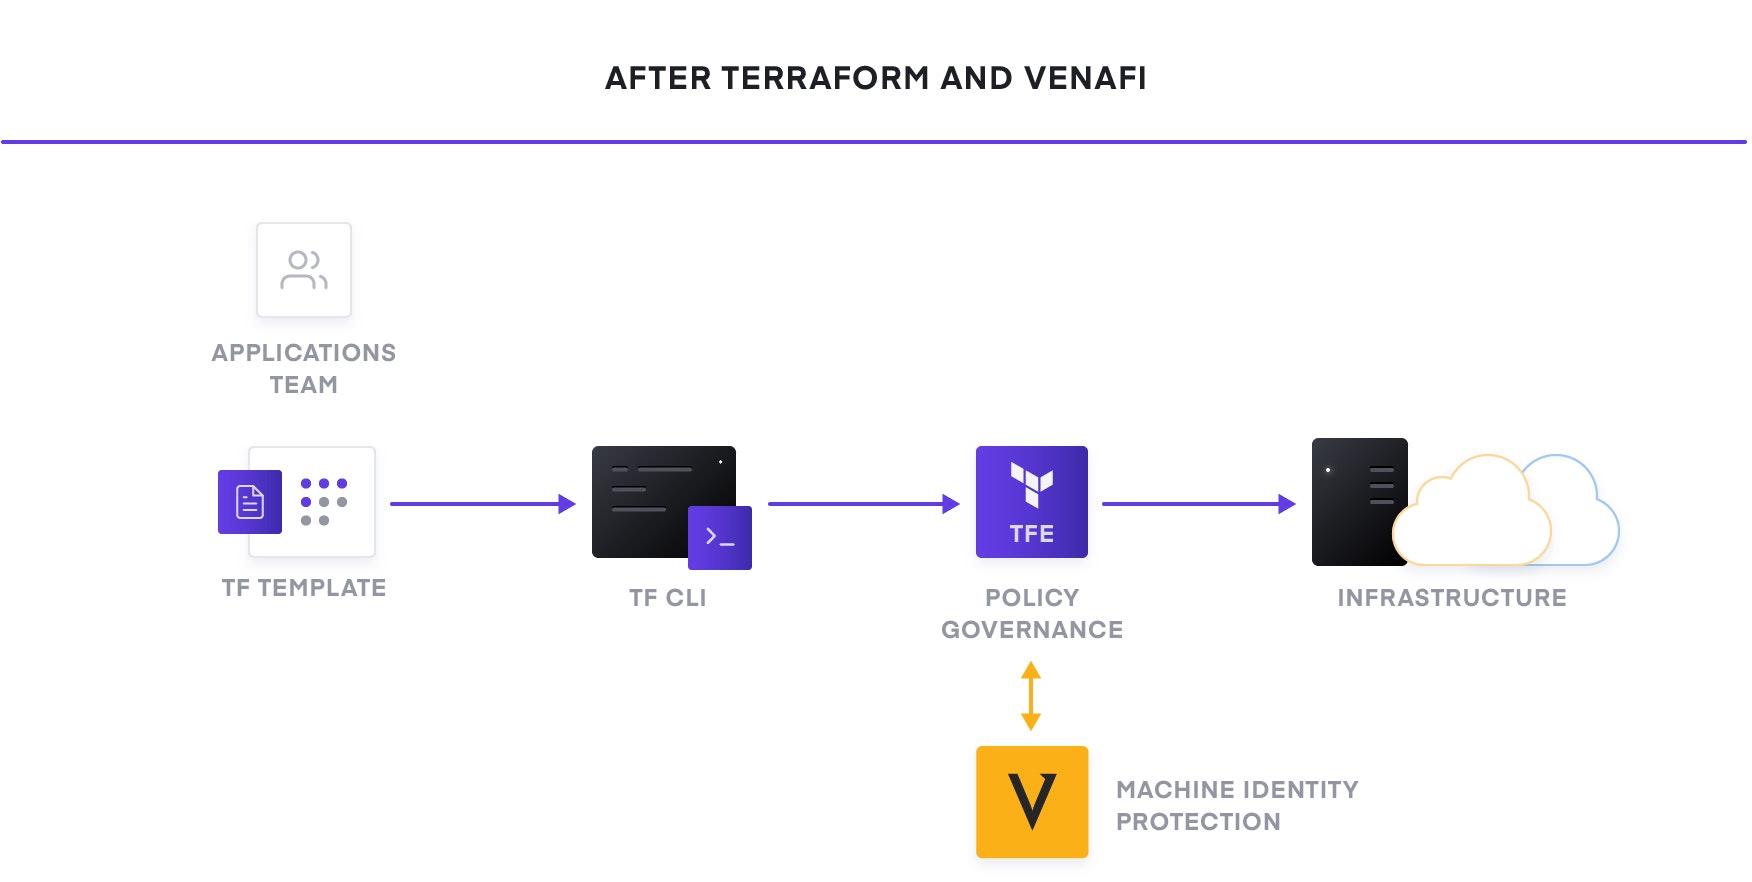 <strong>After Terraform and Venafi:</strong>
 Infrastructure Provisioning and X.509 Certificate Issuance